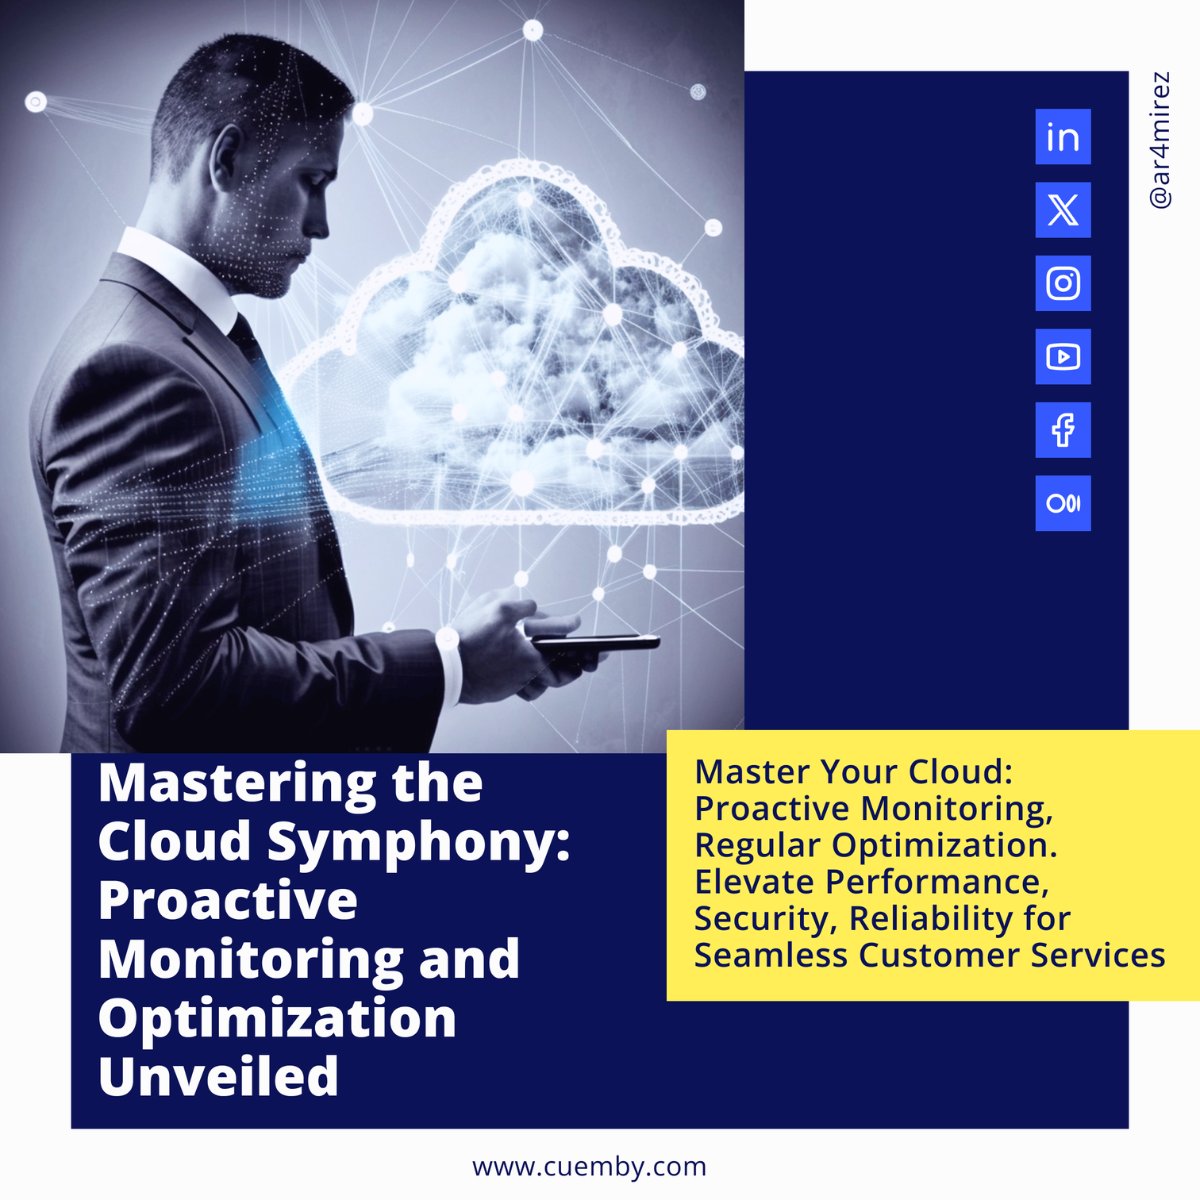 👨‍💻Unleash the power of cloud monitoring!✅ Keeping systems agile, secure, and smooth as butter is our mission. Proactive remediation, optimization, and a touch of magic  ✨ ensure your cloud experience is top-notch. #SecurityInCloud #CloudMonitoring #TechInsights